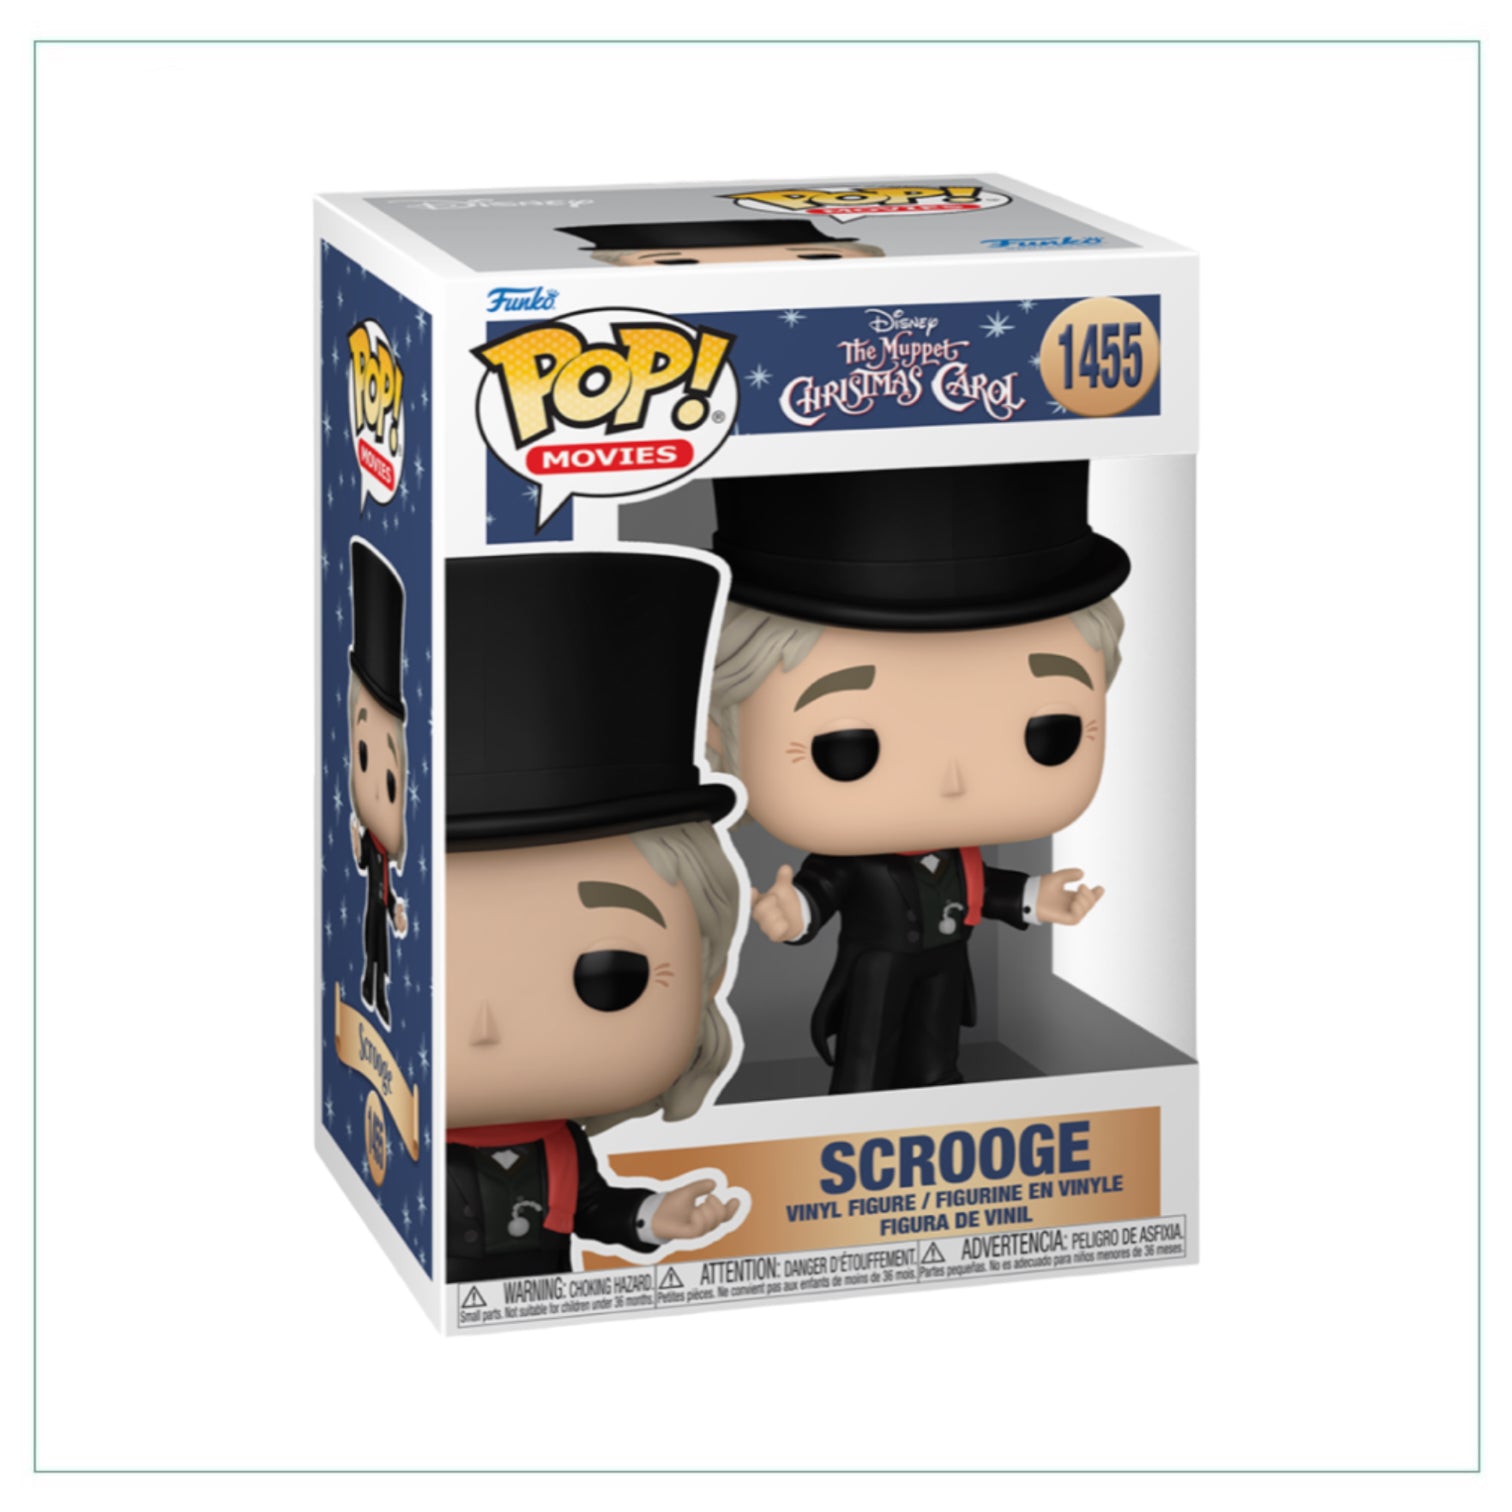 Scrooge #1455 Funko Pop! The Muppets Christmas Carol - PREORDER